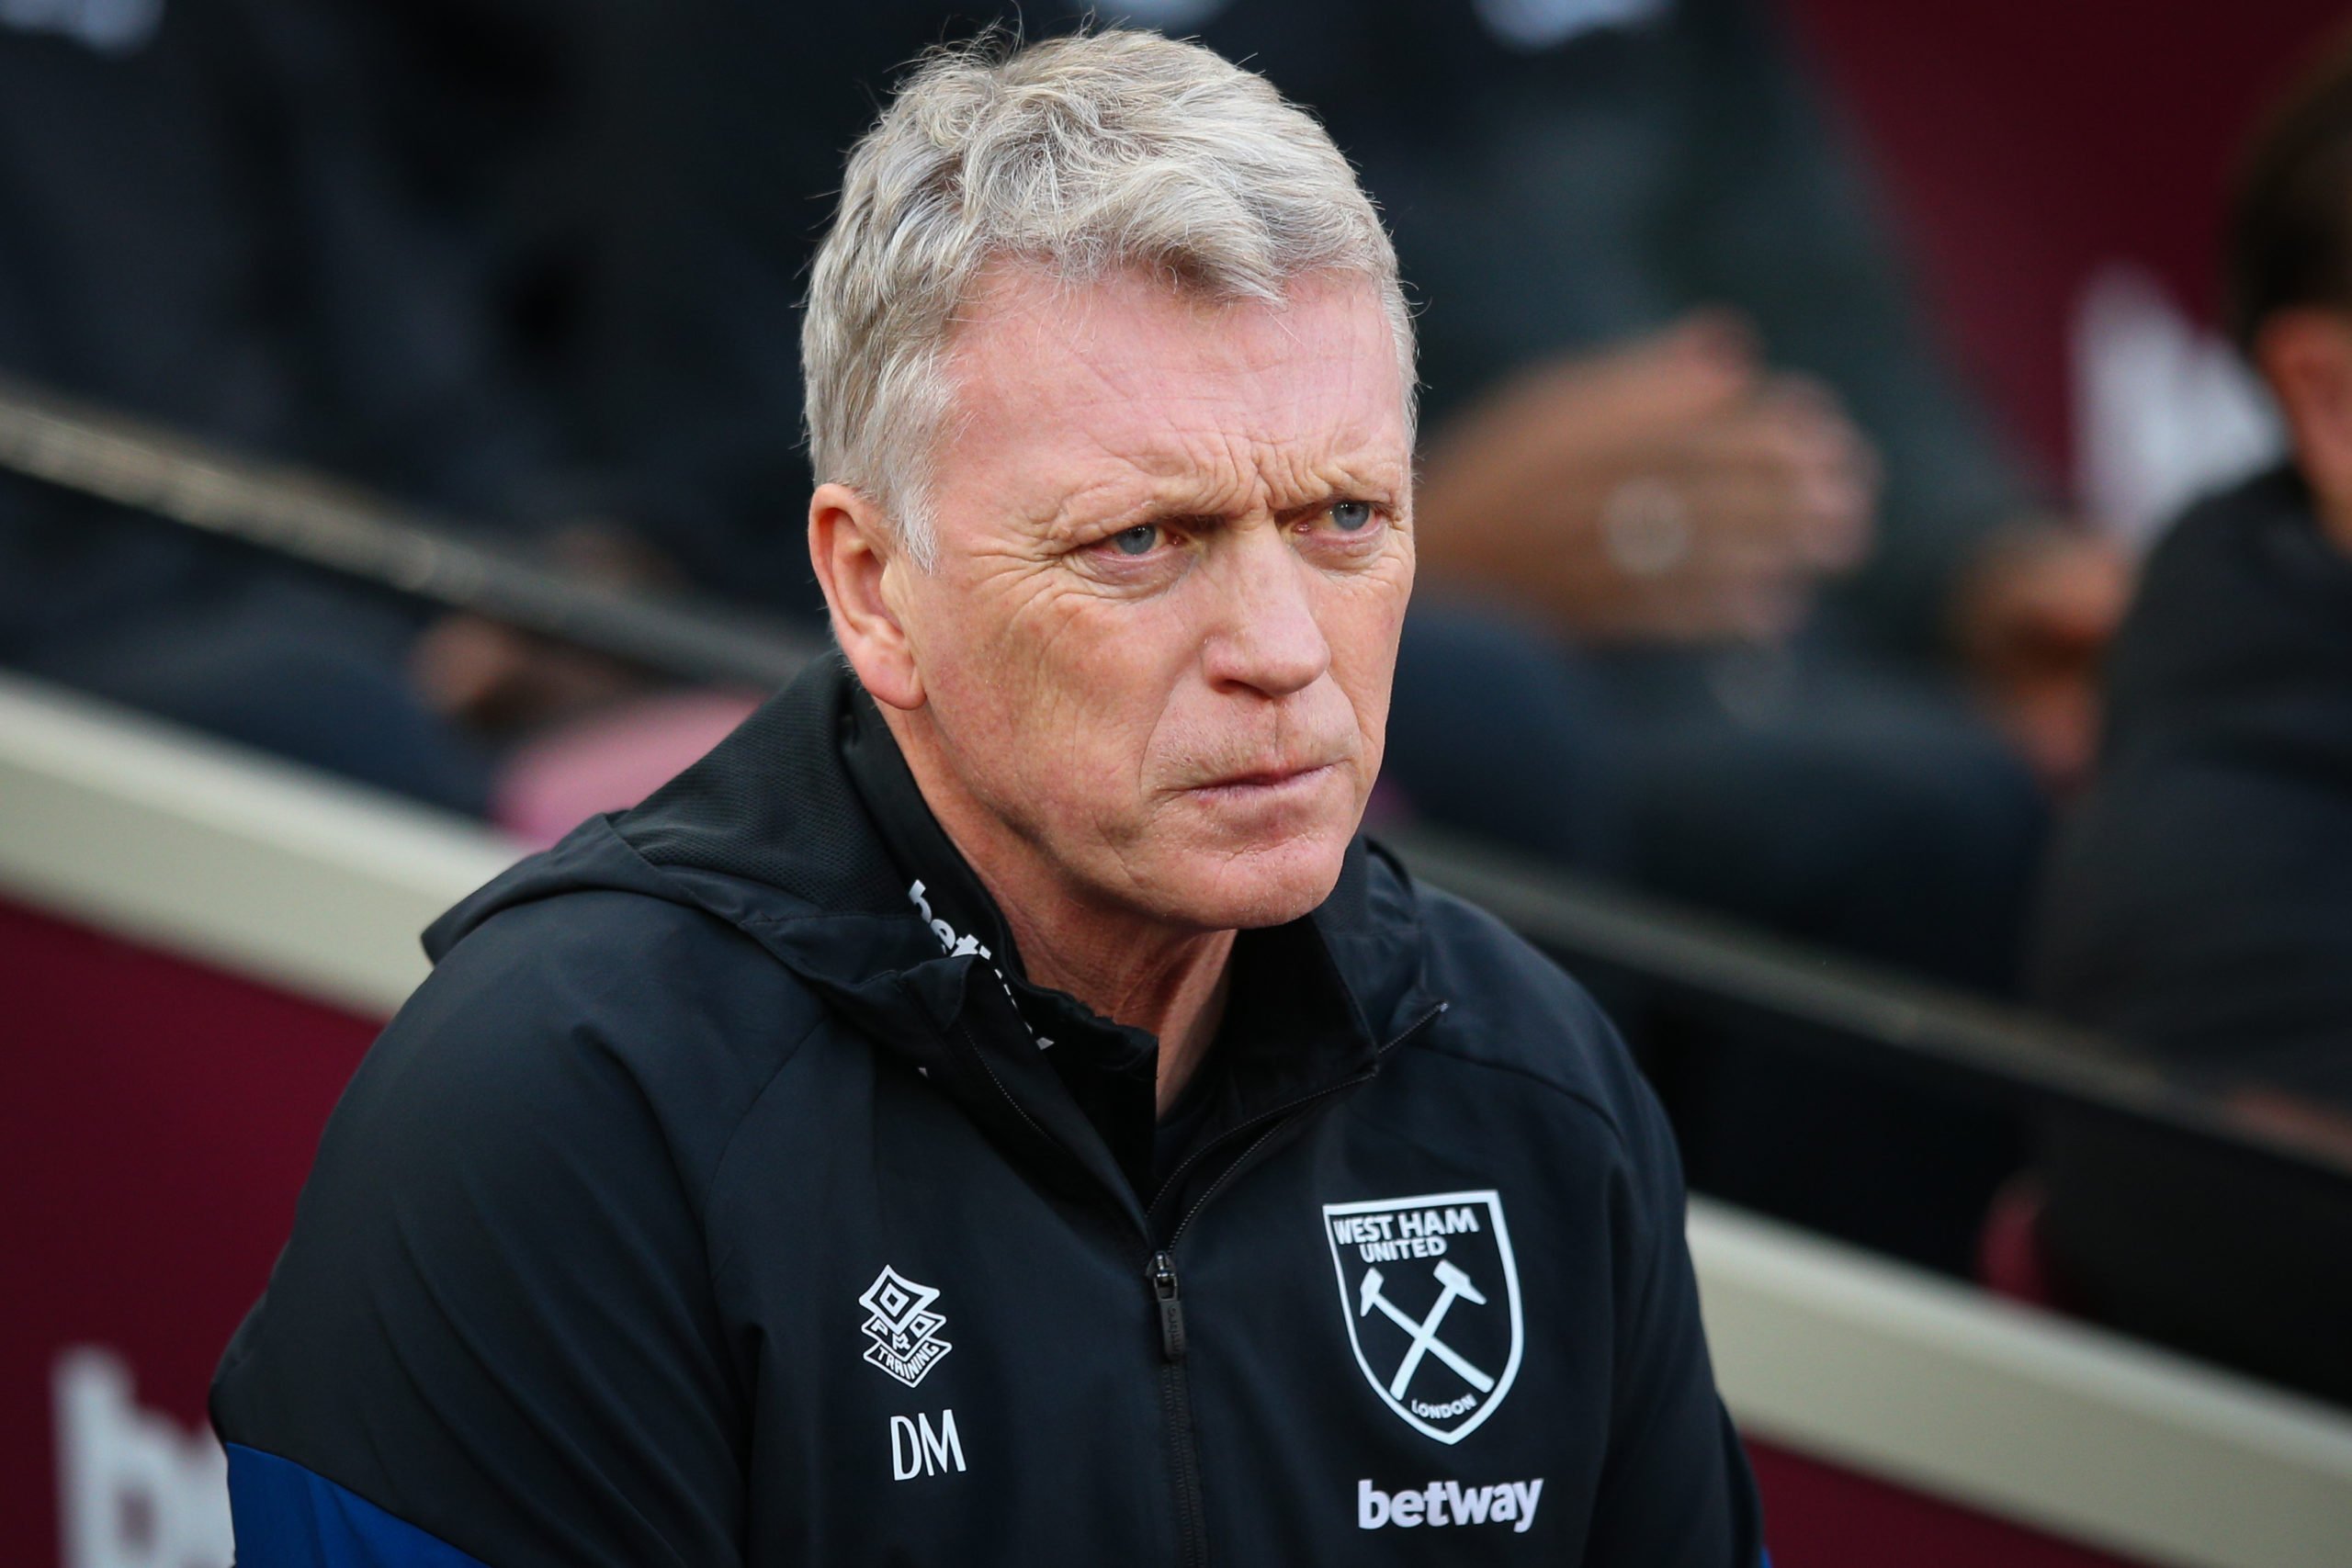 Confirmed West Ham starting line-up for Kidderminster Harriers in the FA Cup as David Moyes goes strong